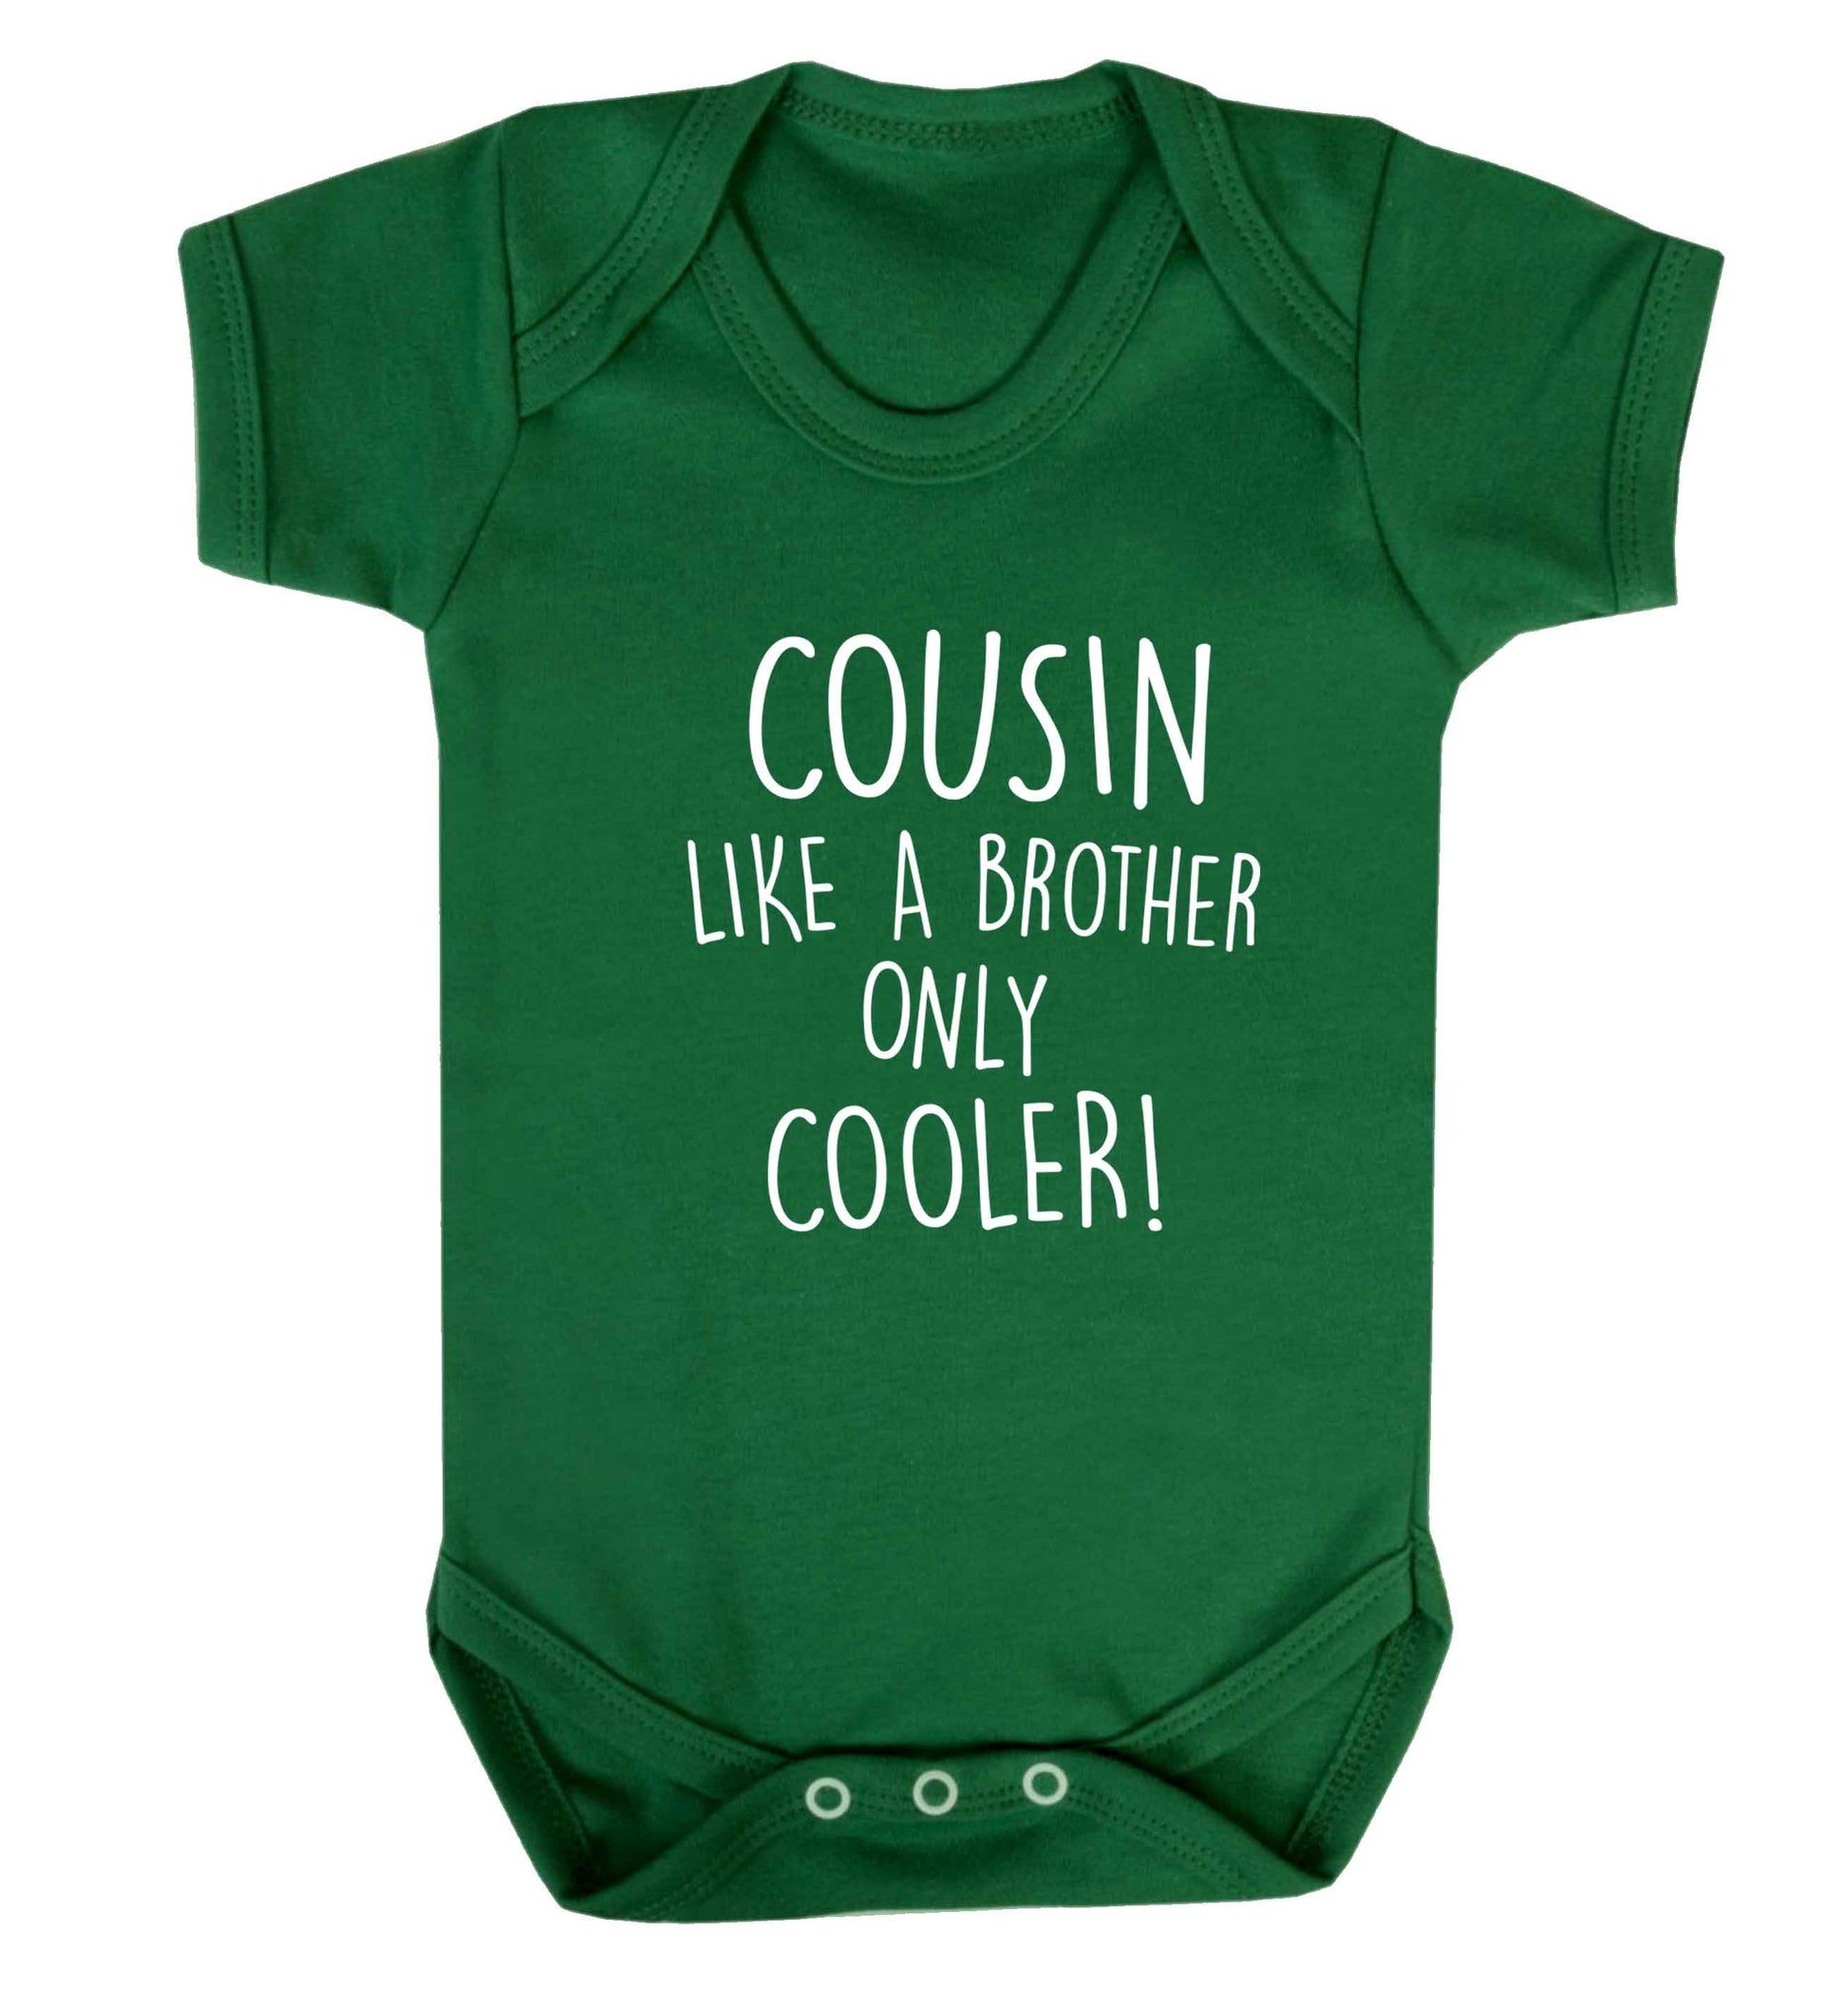 Cousin like a brother only cooler baby vest green 18-24 months